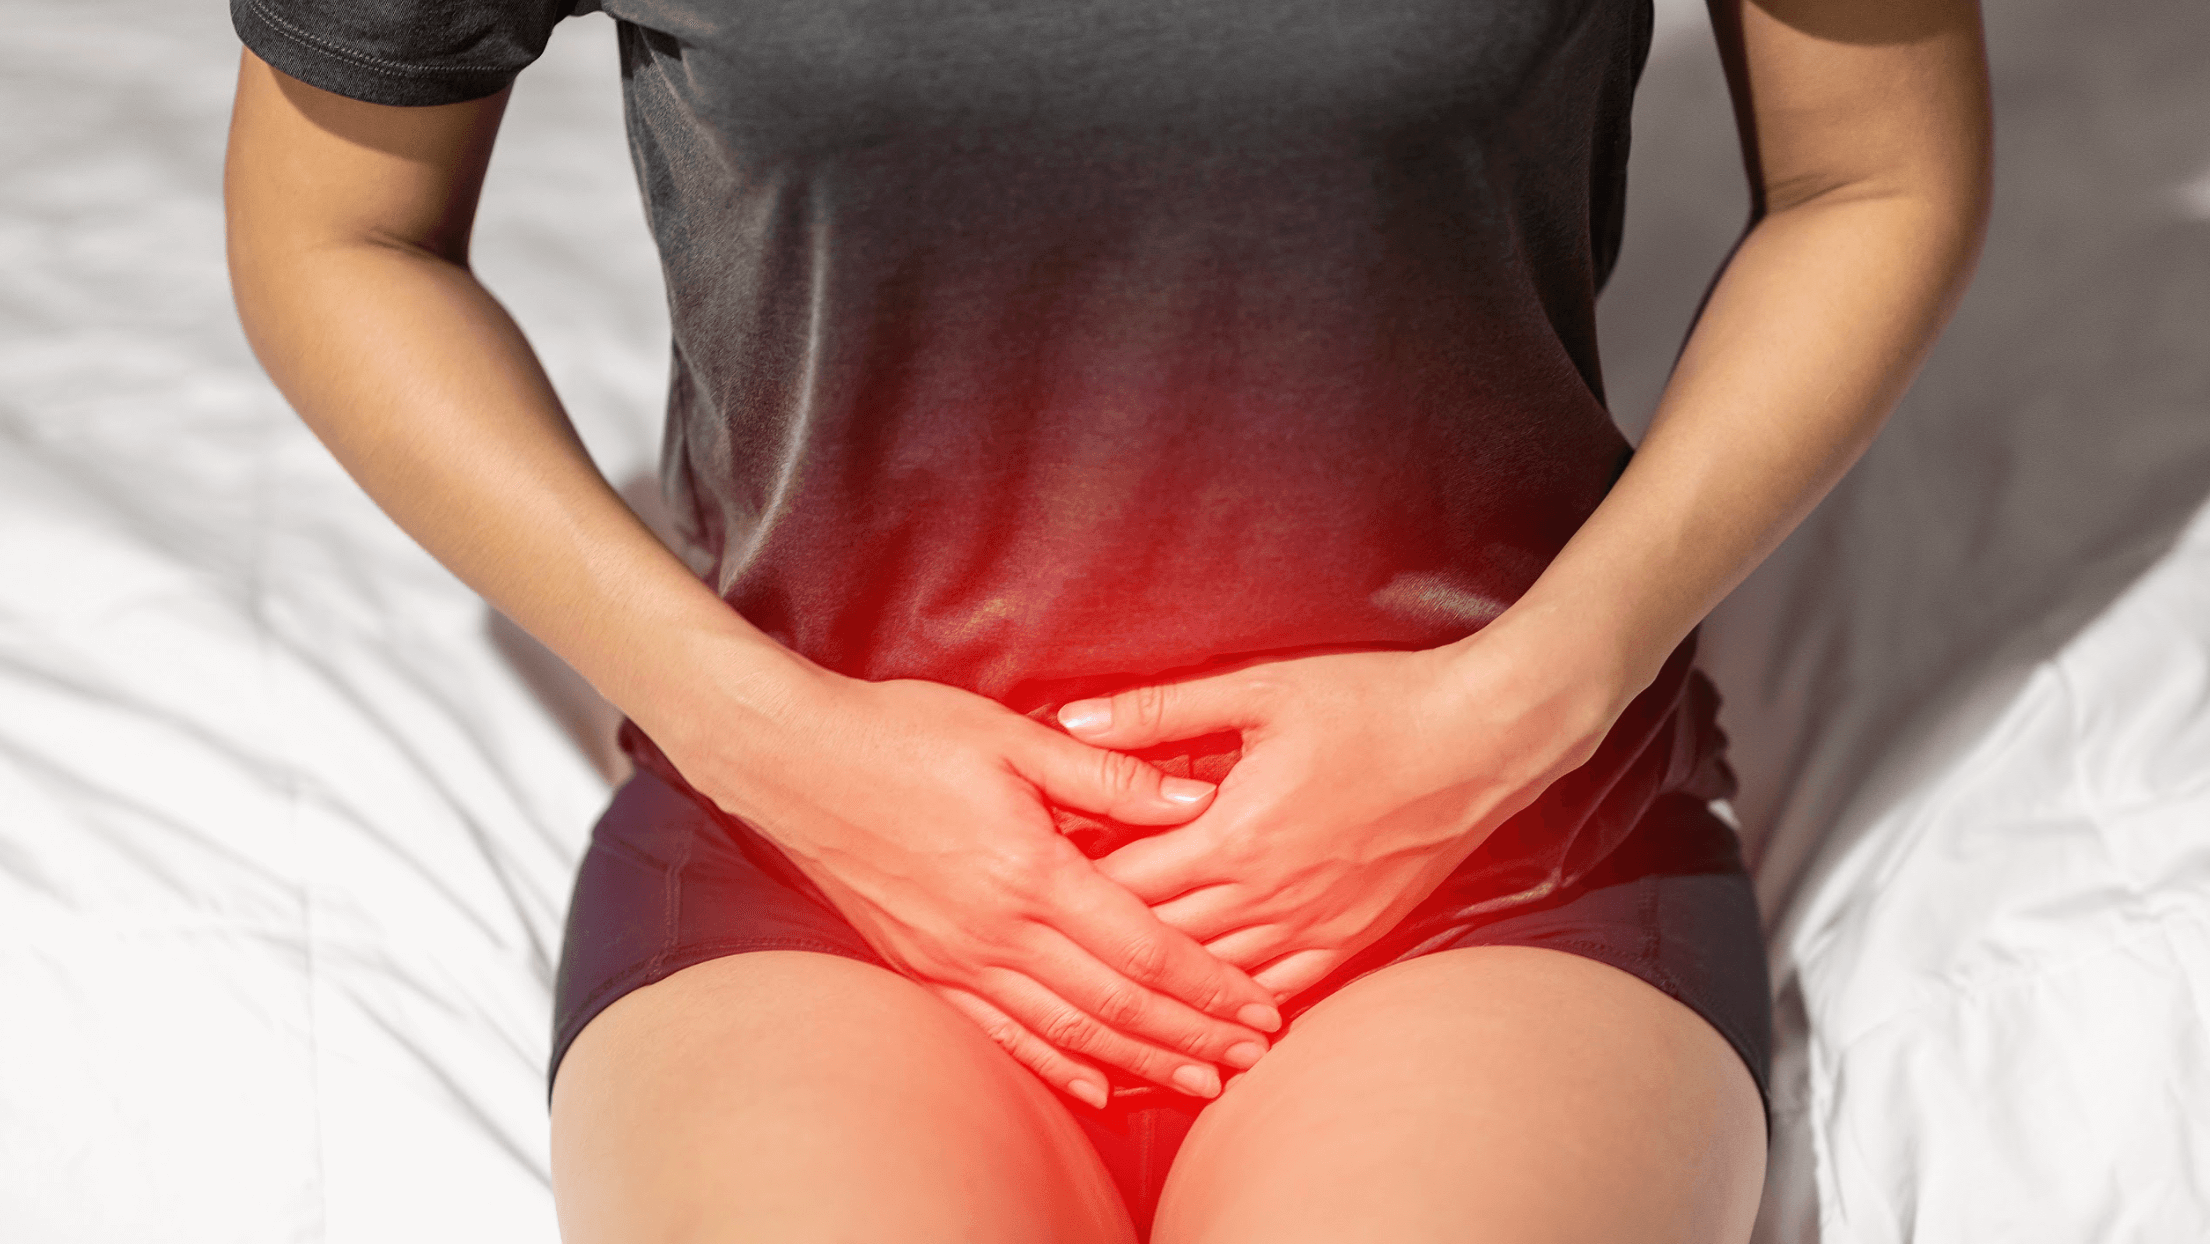 How Does A Tummy Tuck Help With Urinary Incontinence?